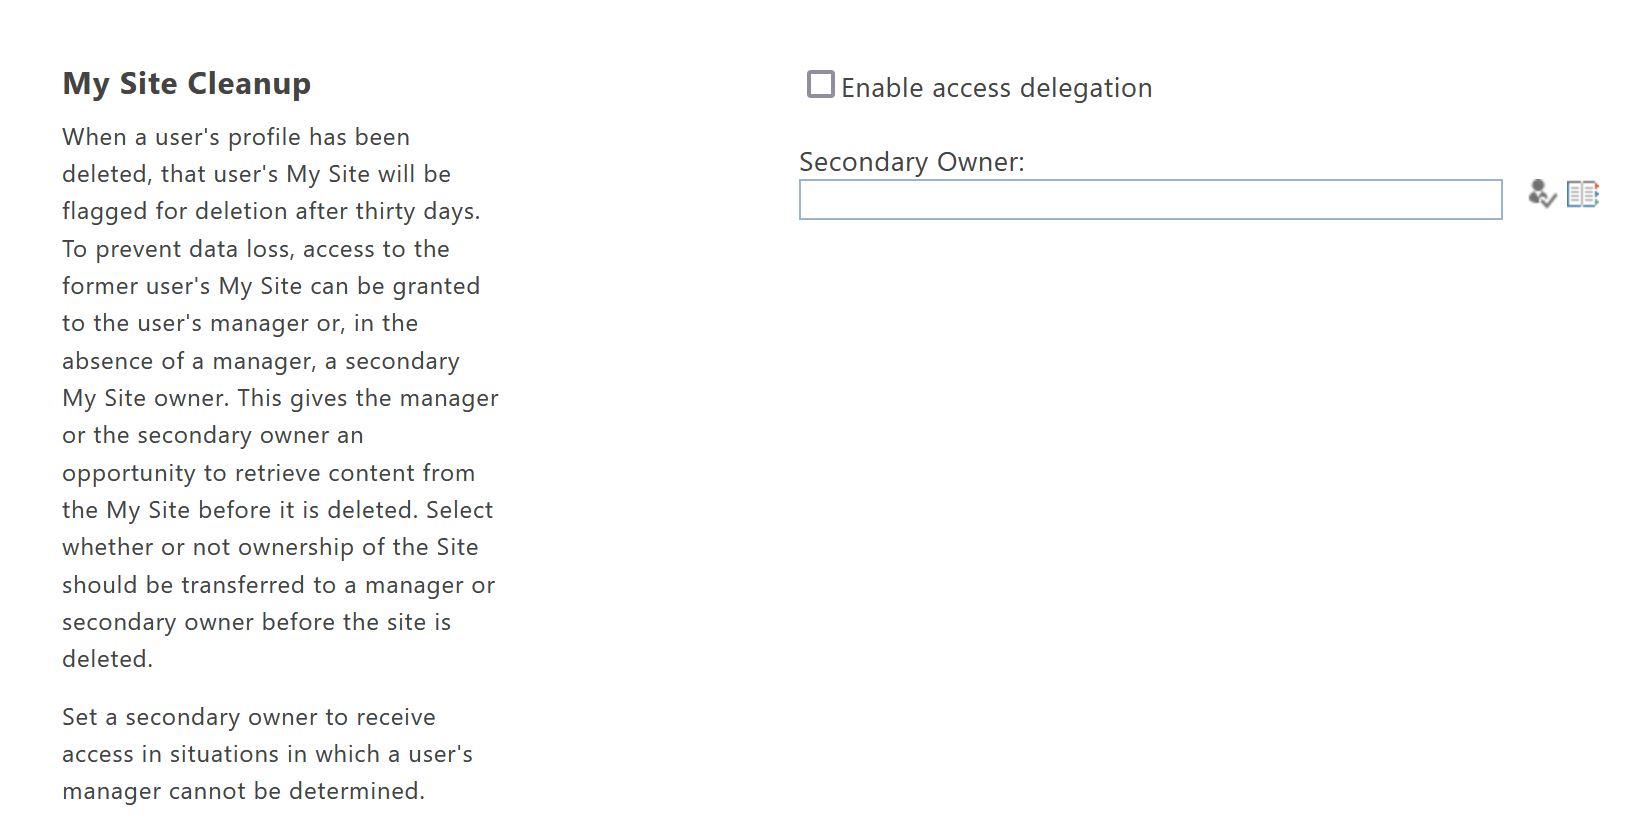 SharePoint Online - My Site settings - Cleanup